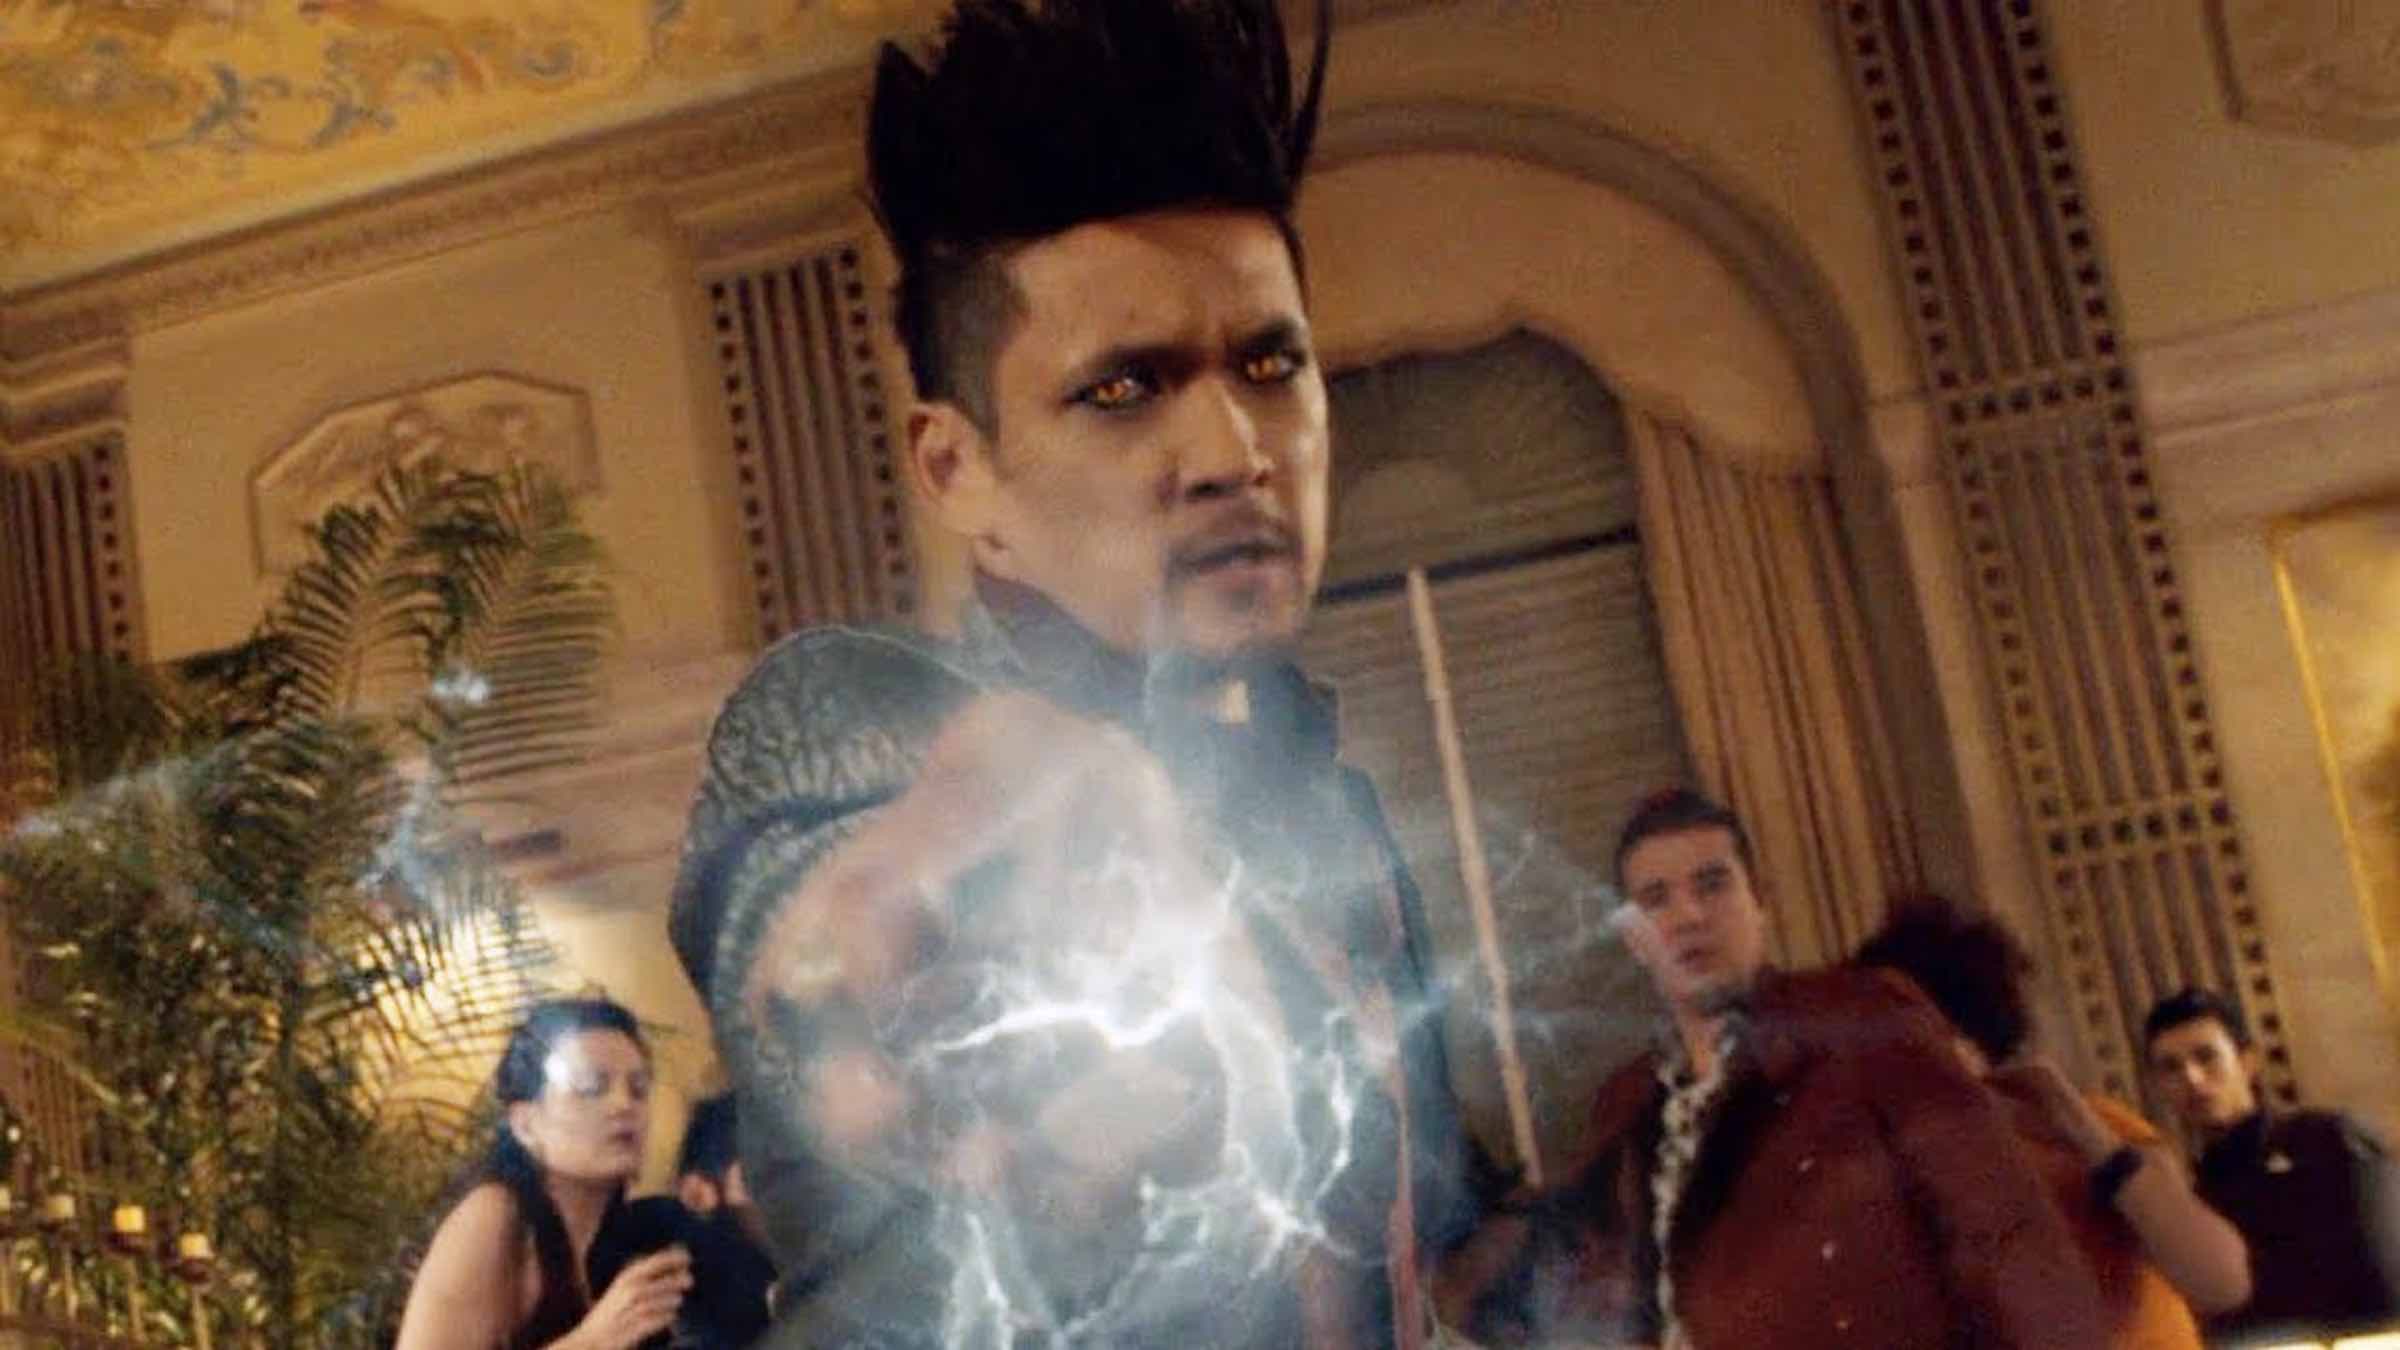 Harry Shum Jr. has been a standout on ‘Shadowhunters’. Take our quiz to test your knowledge about his character.